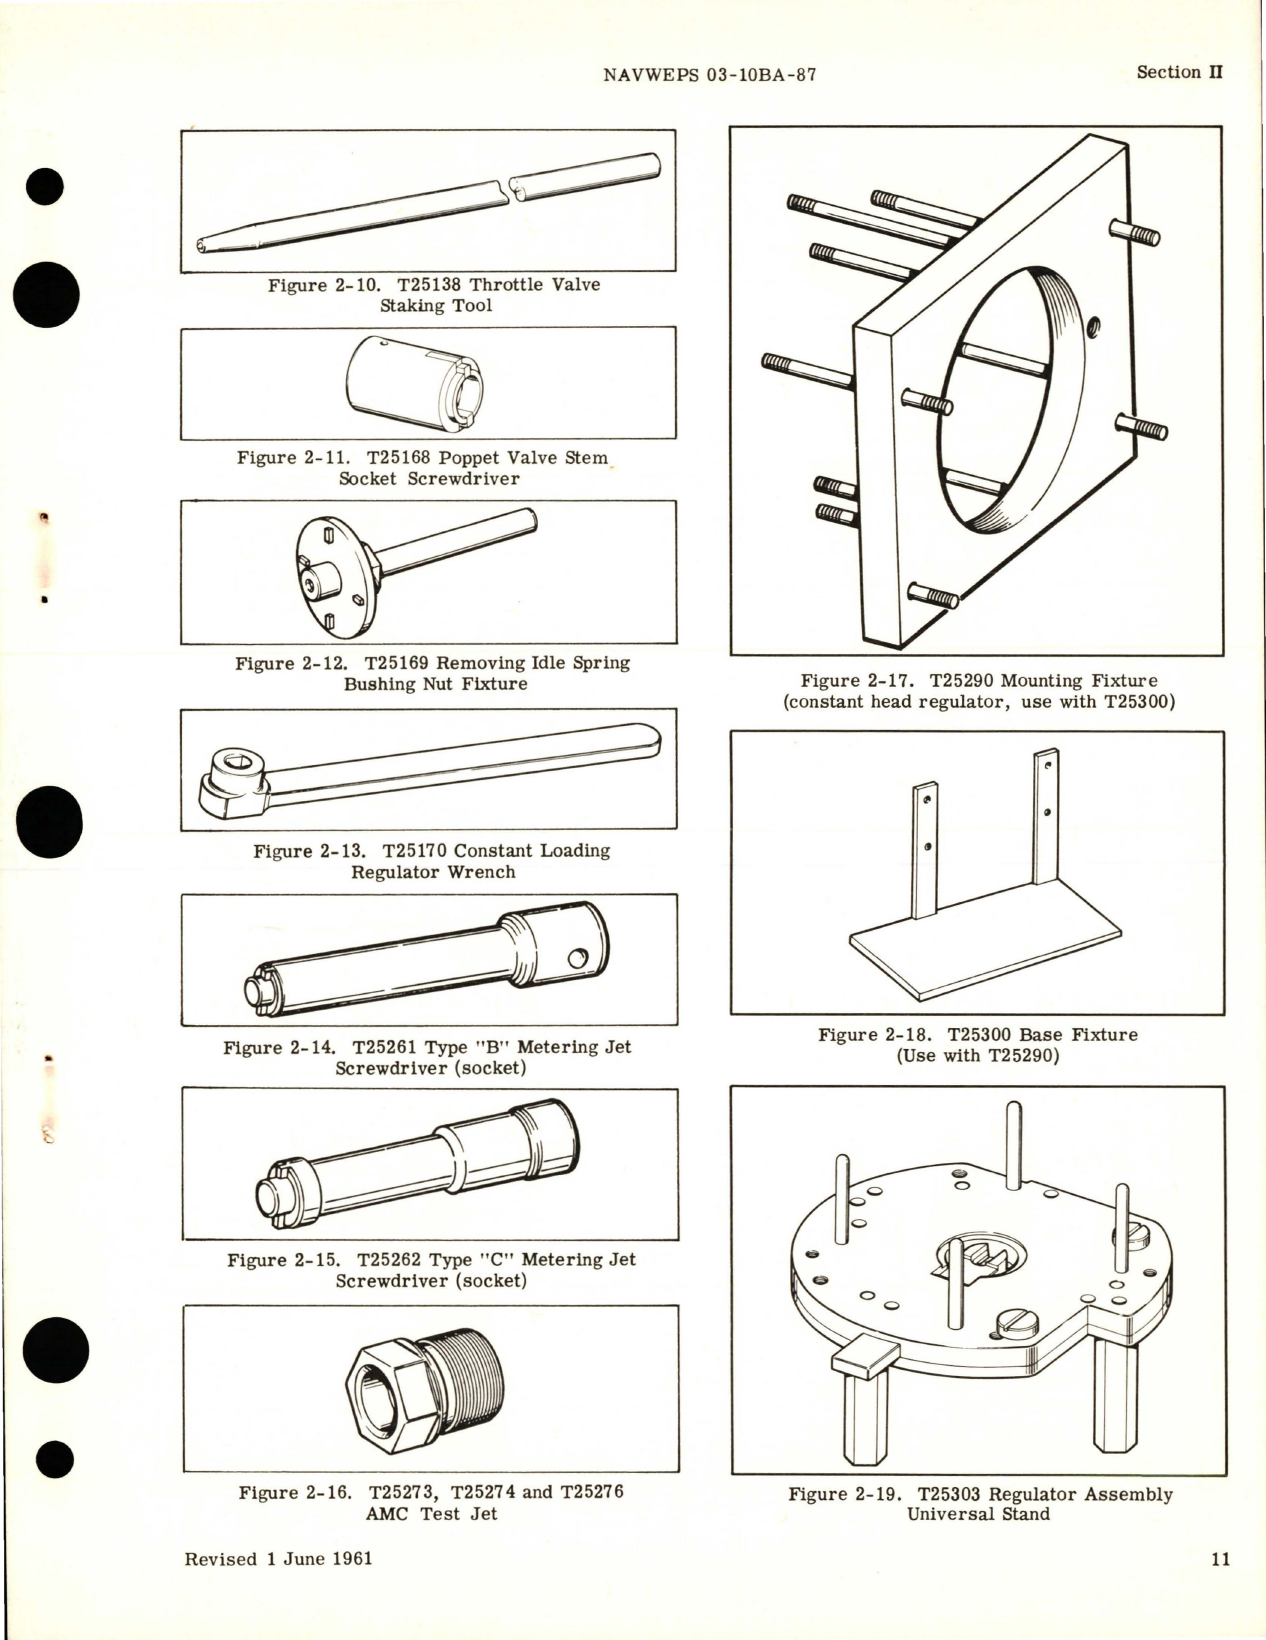 Sample page 7 from AirCorps Library document: Overhaul Instructions for Injection Carburetor - Model PR-58E5